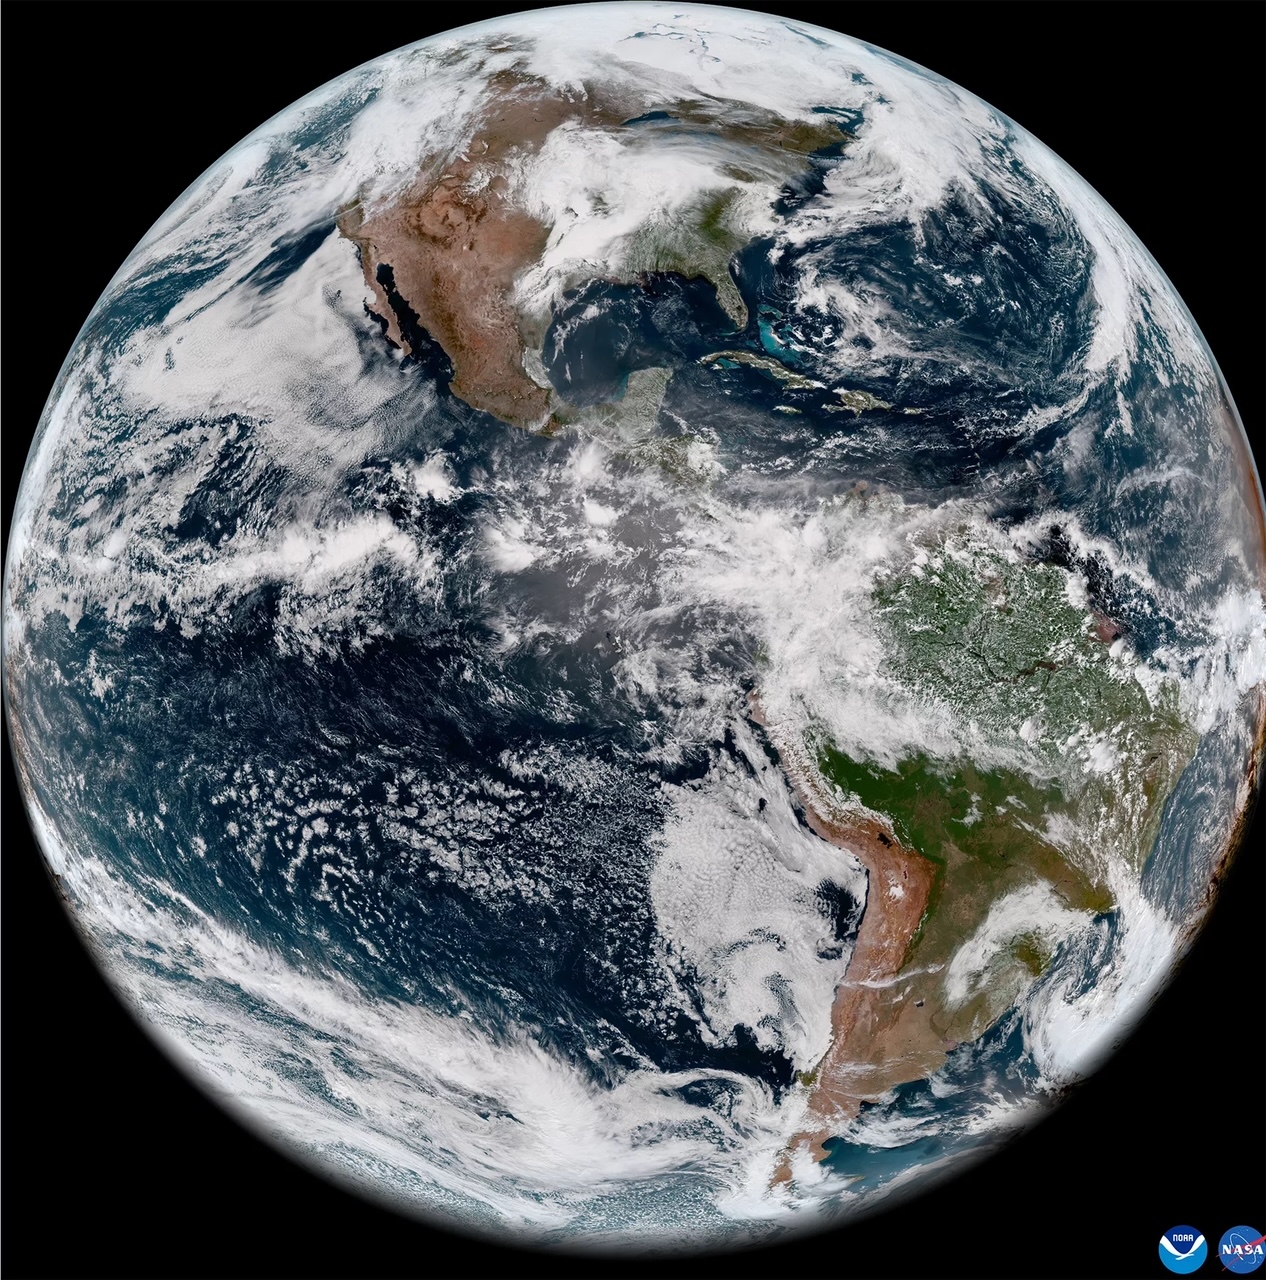 NOAA Releases First Image from GOES-18 Weather Satellite